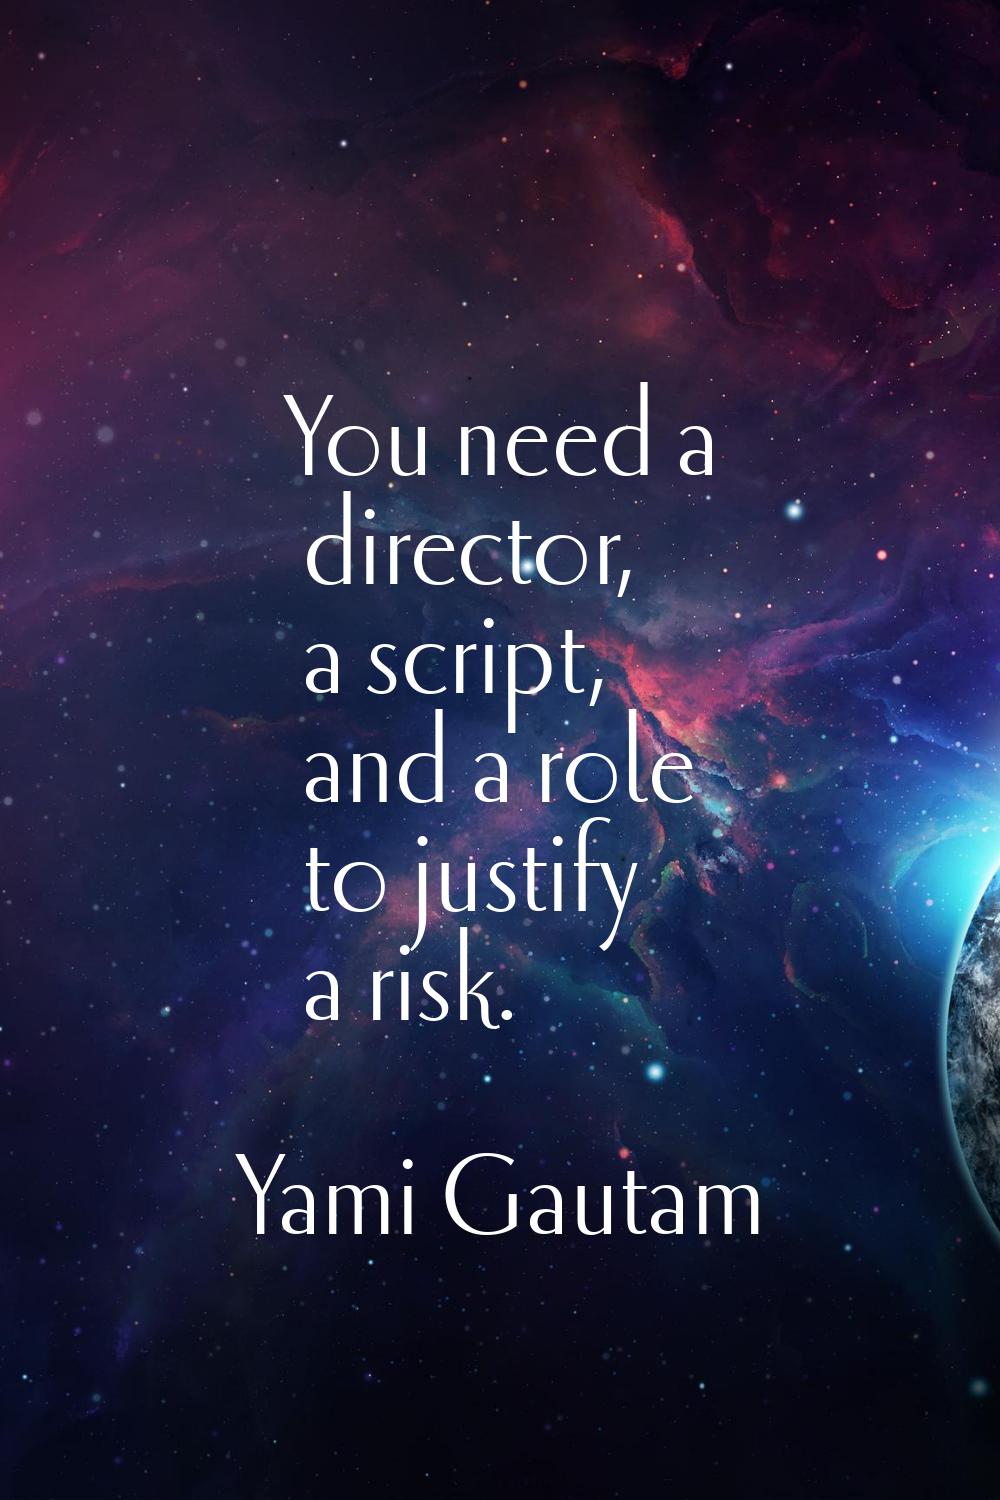 You need a director, a script, and a role to justify a risk.